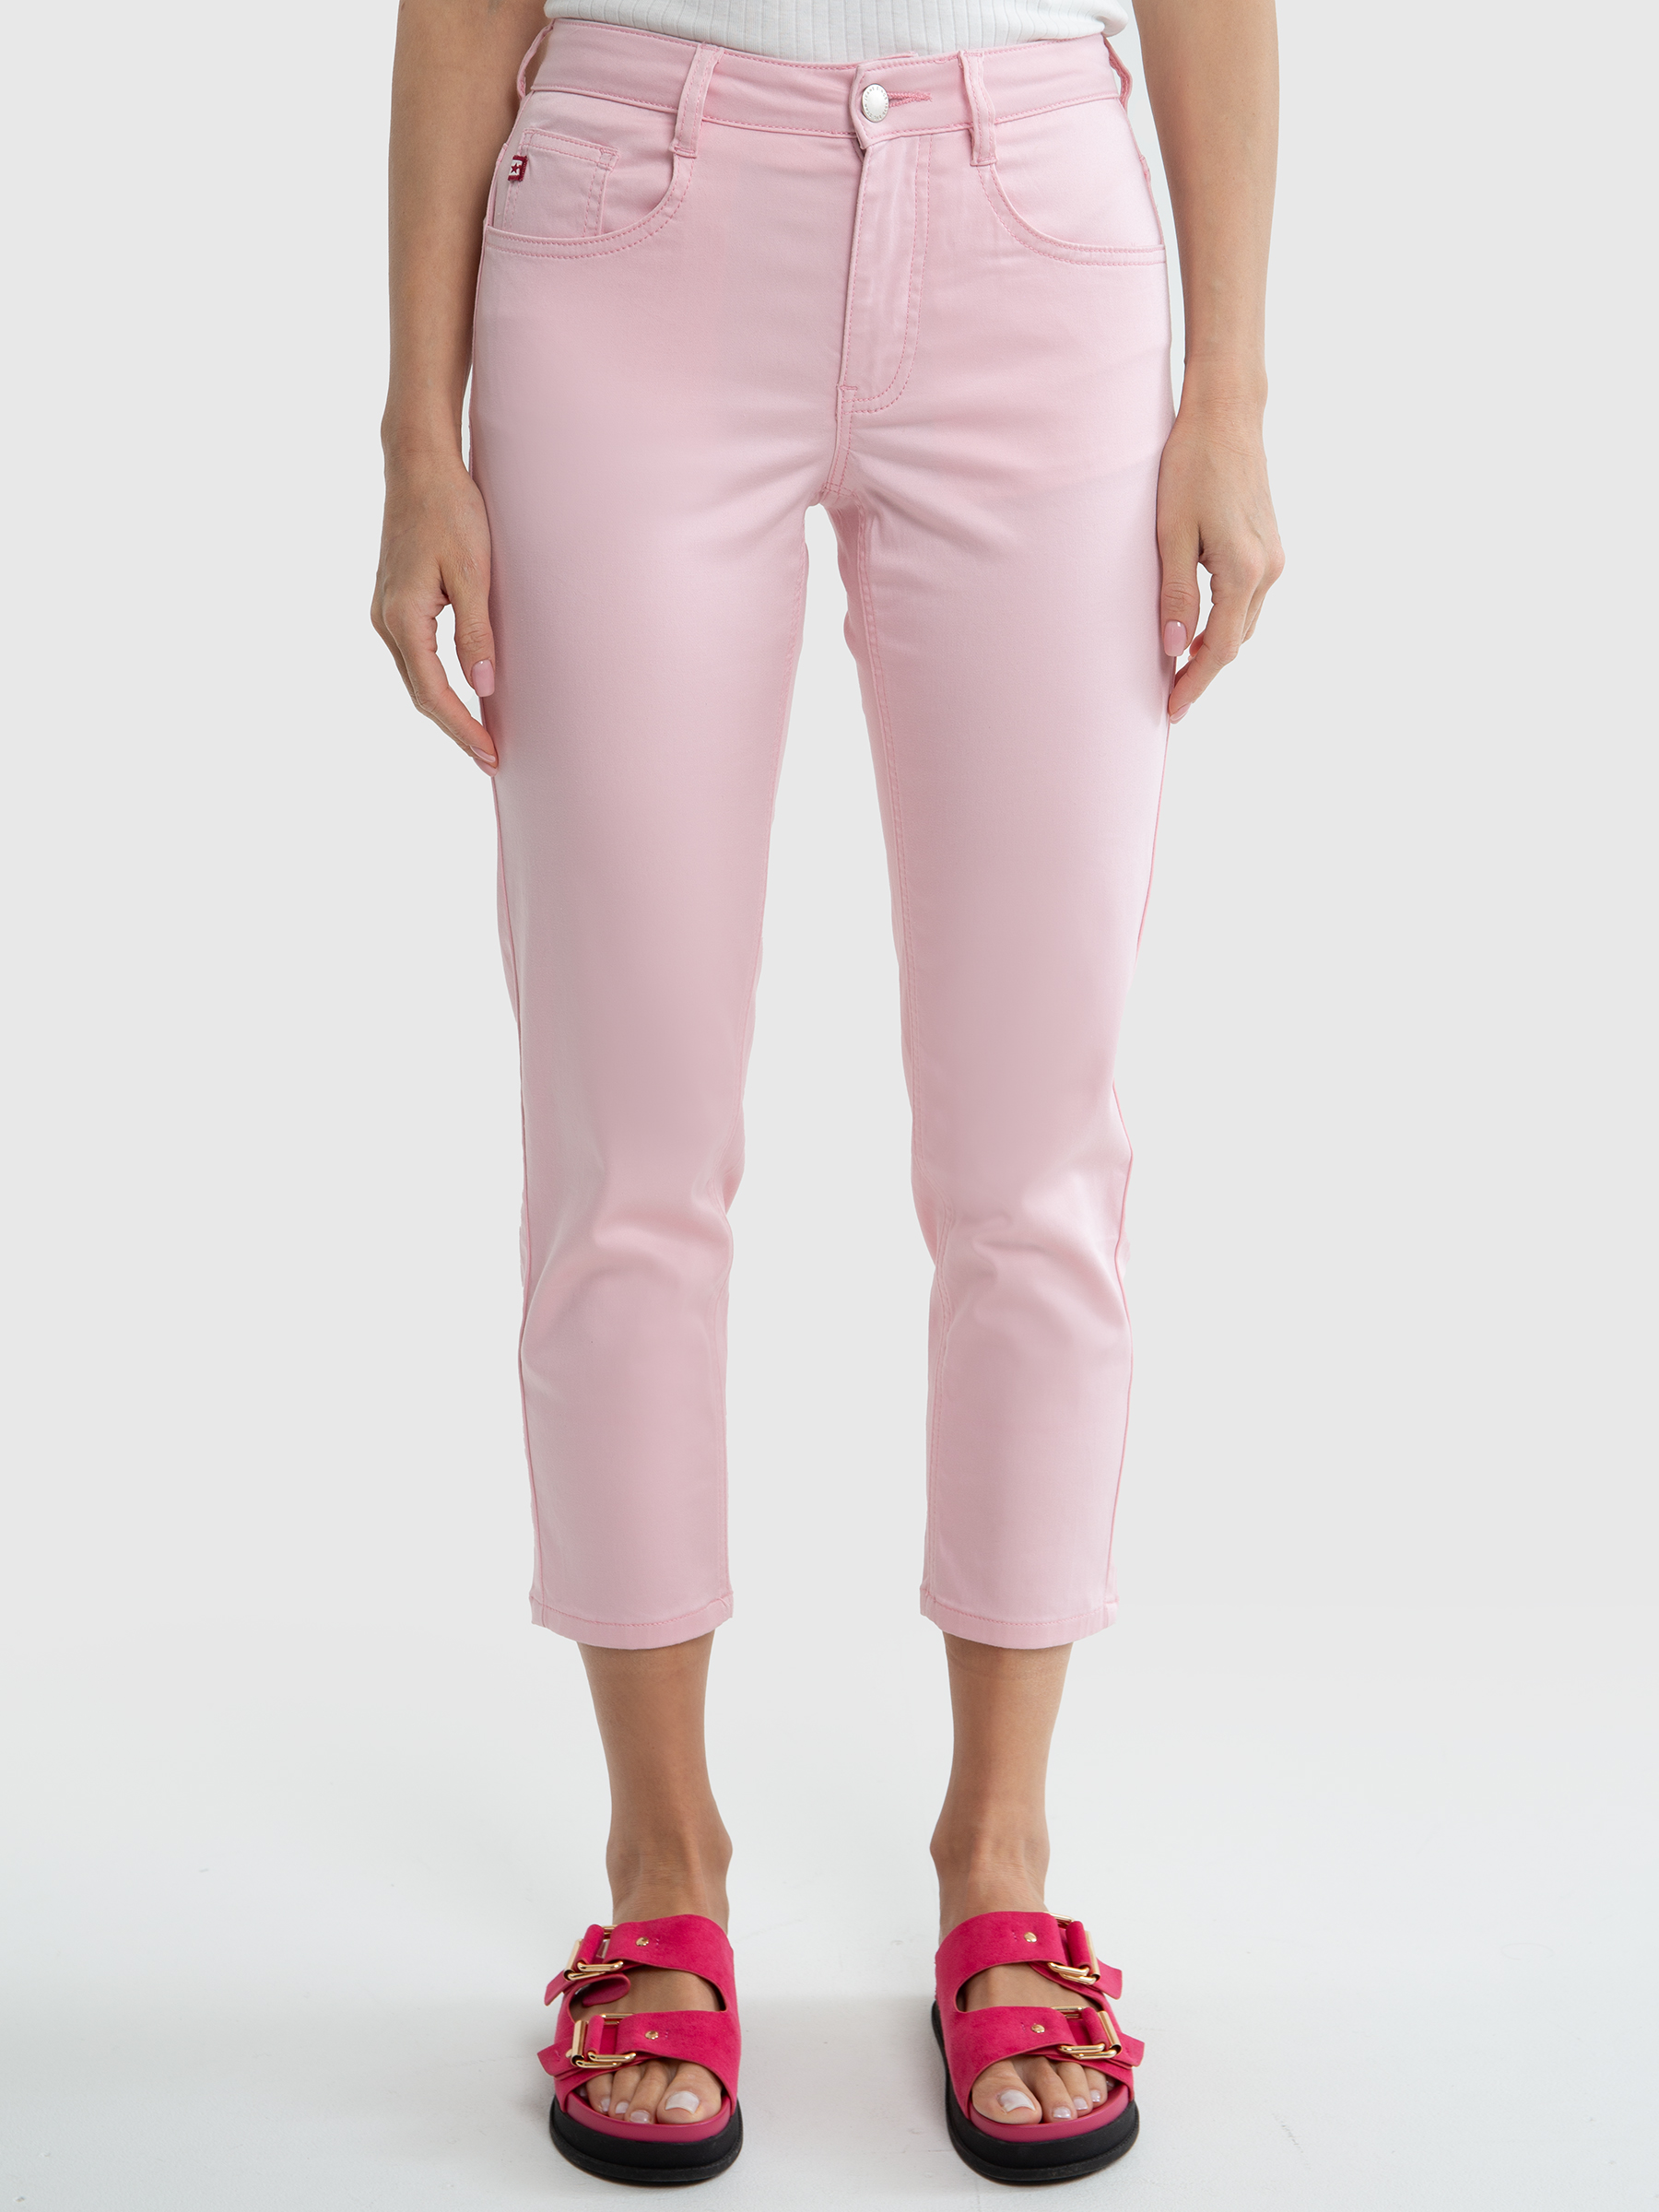 Big Star Woman's Tapered Trousers Non Denim 350011  600